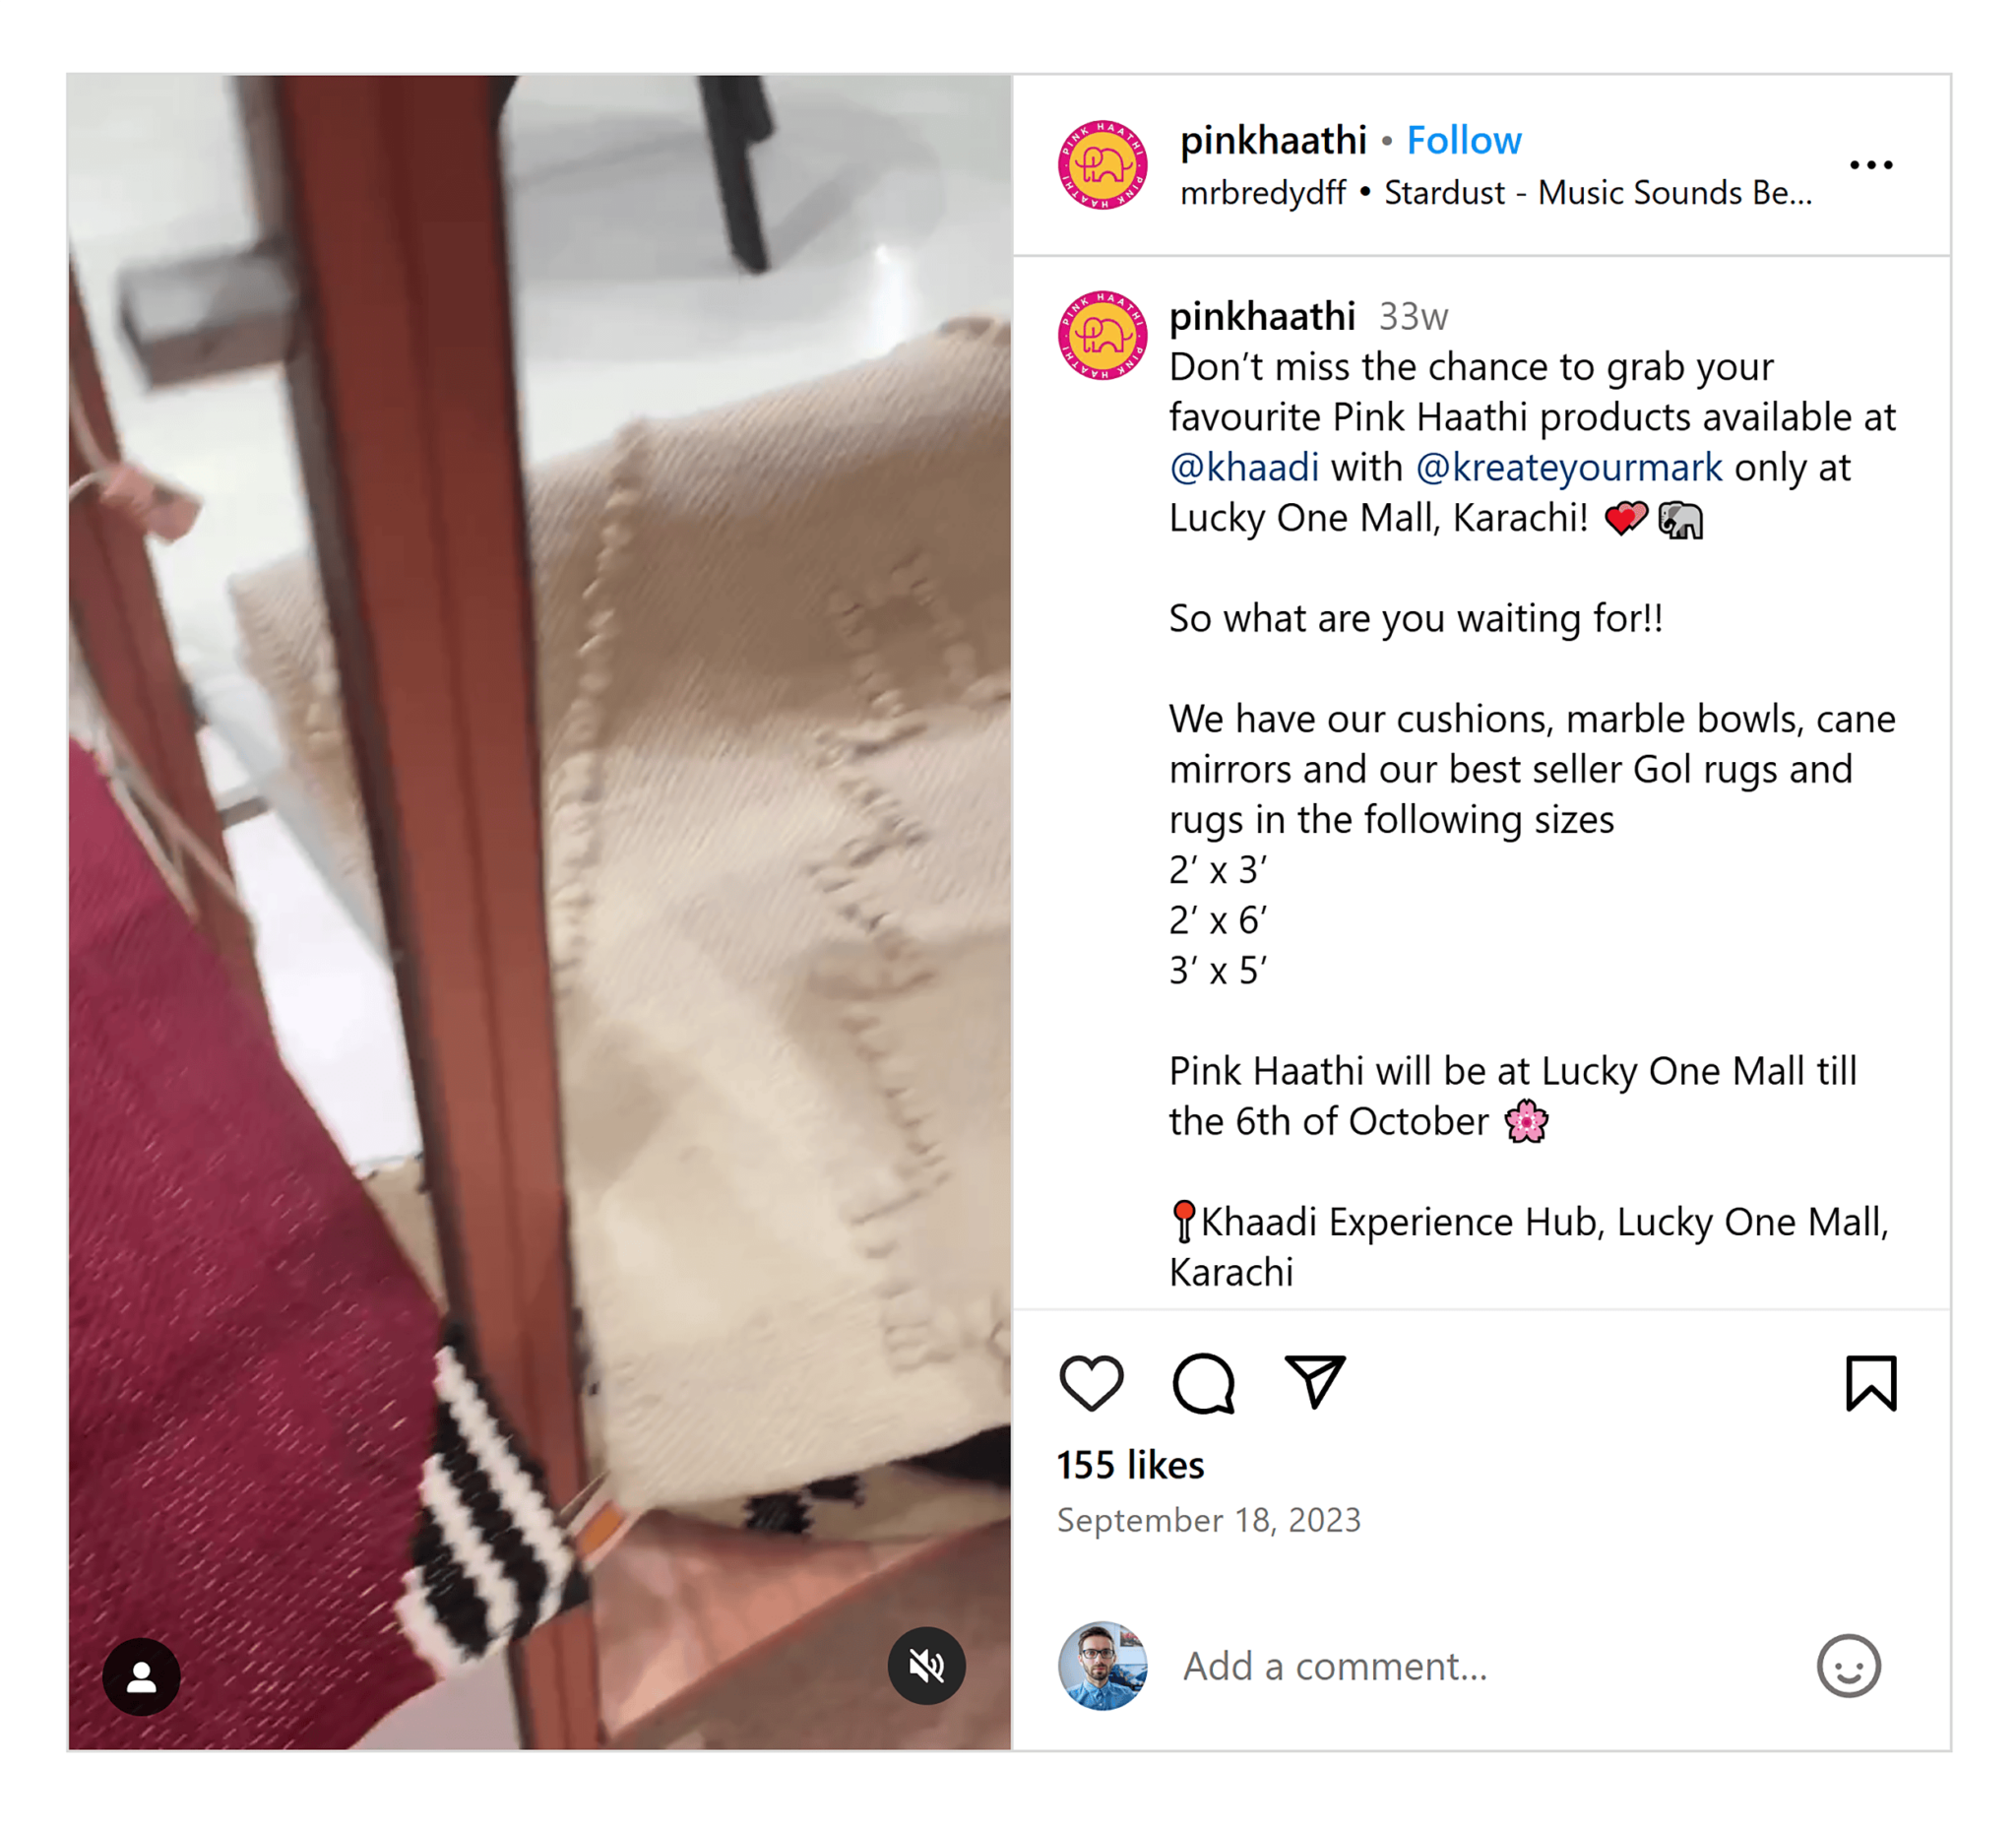 instagram-pink-haathi Small Business Marketing: 6 Proven Strategies for More Reach